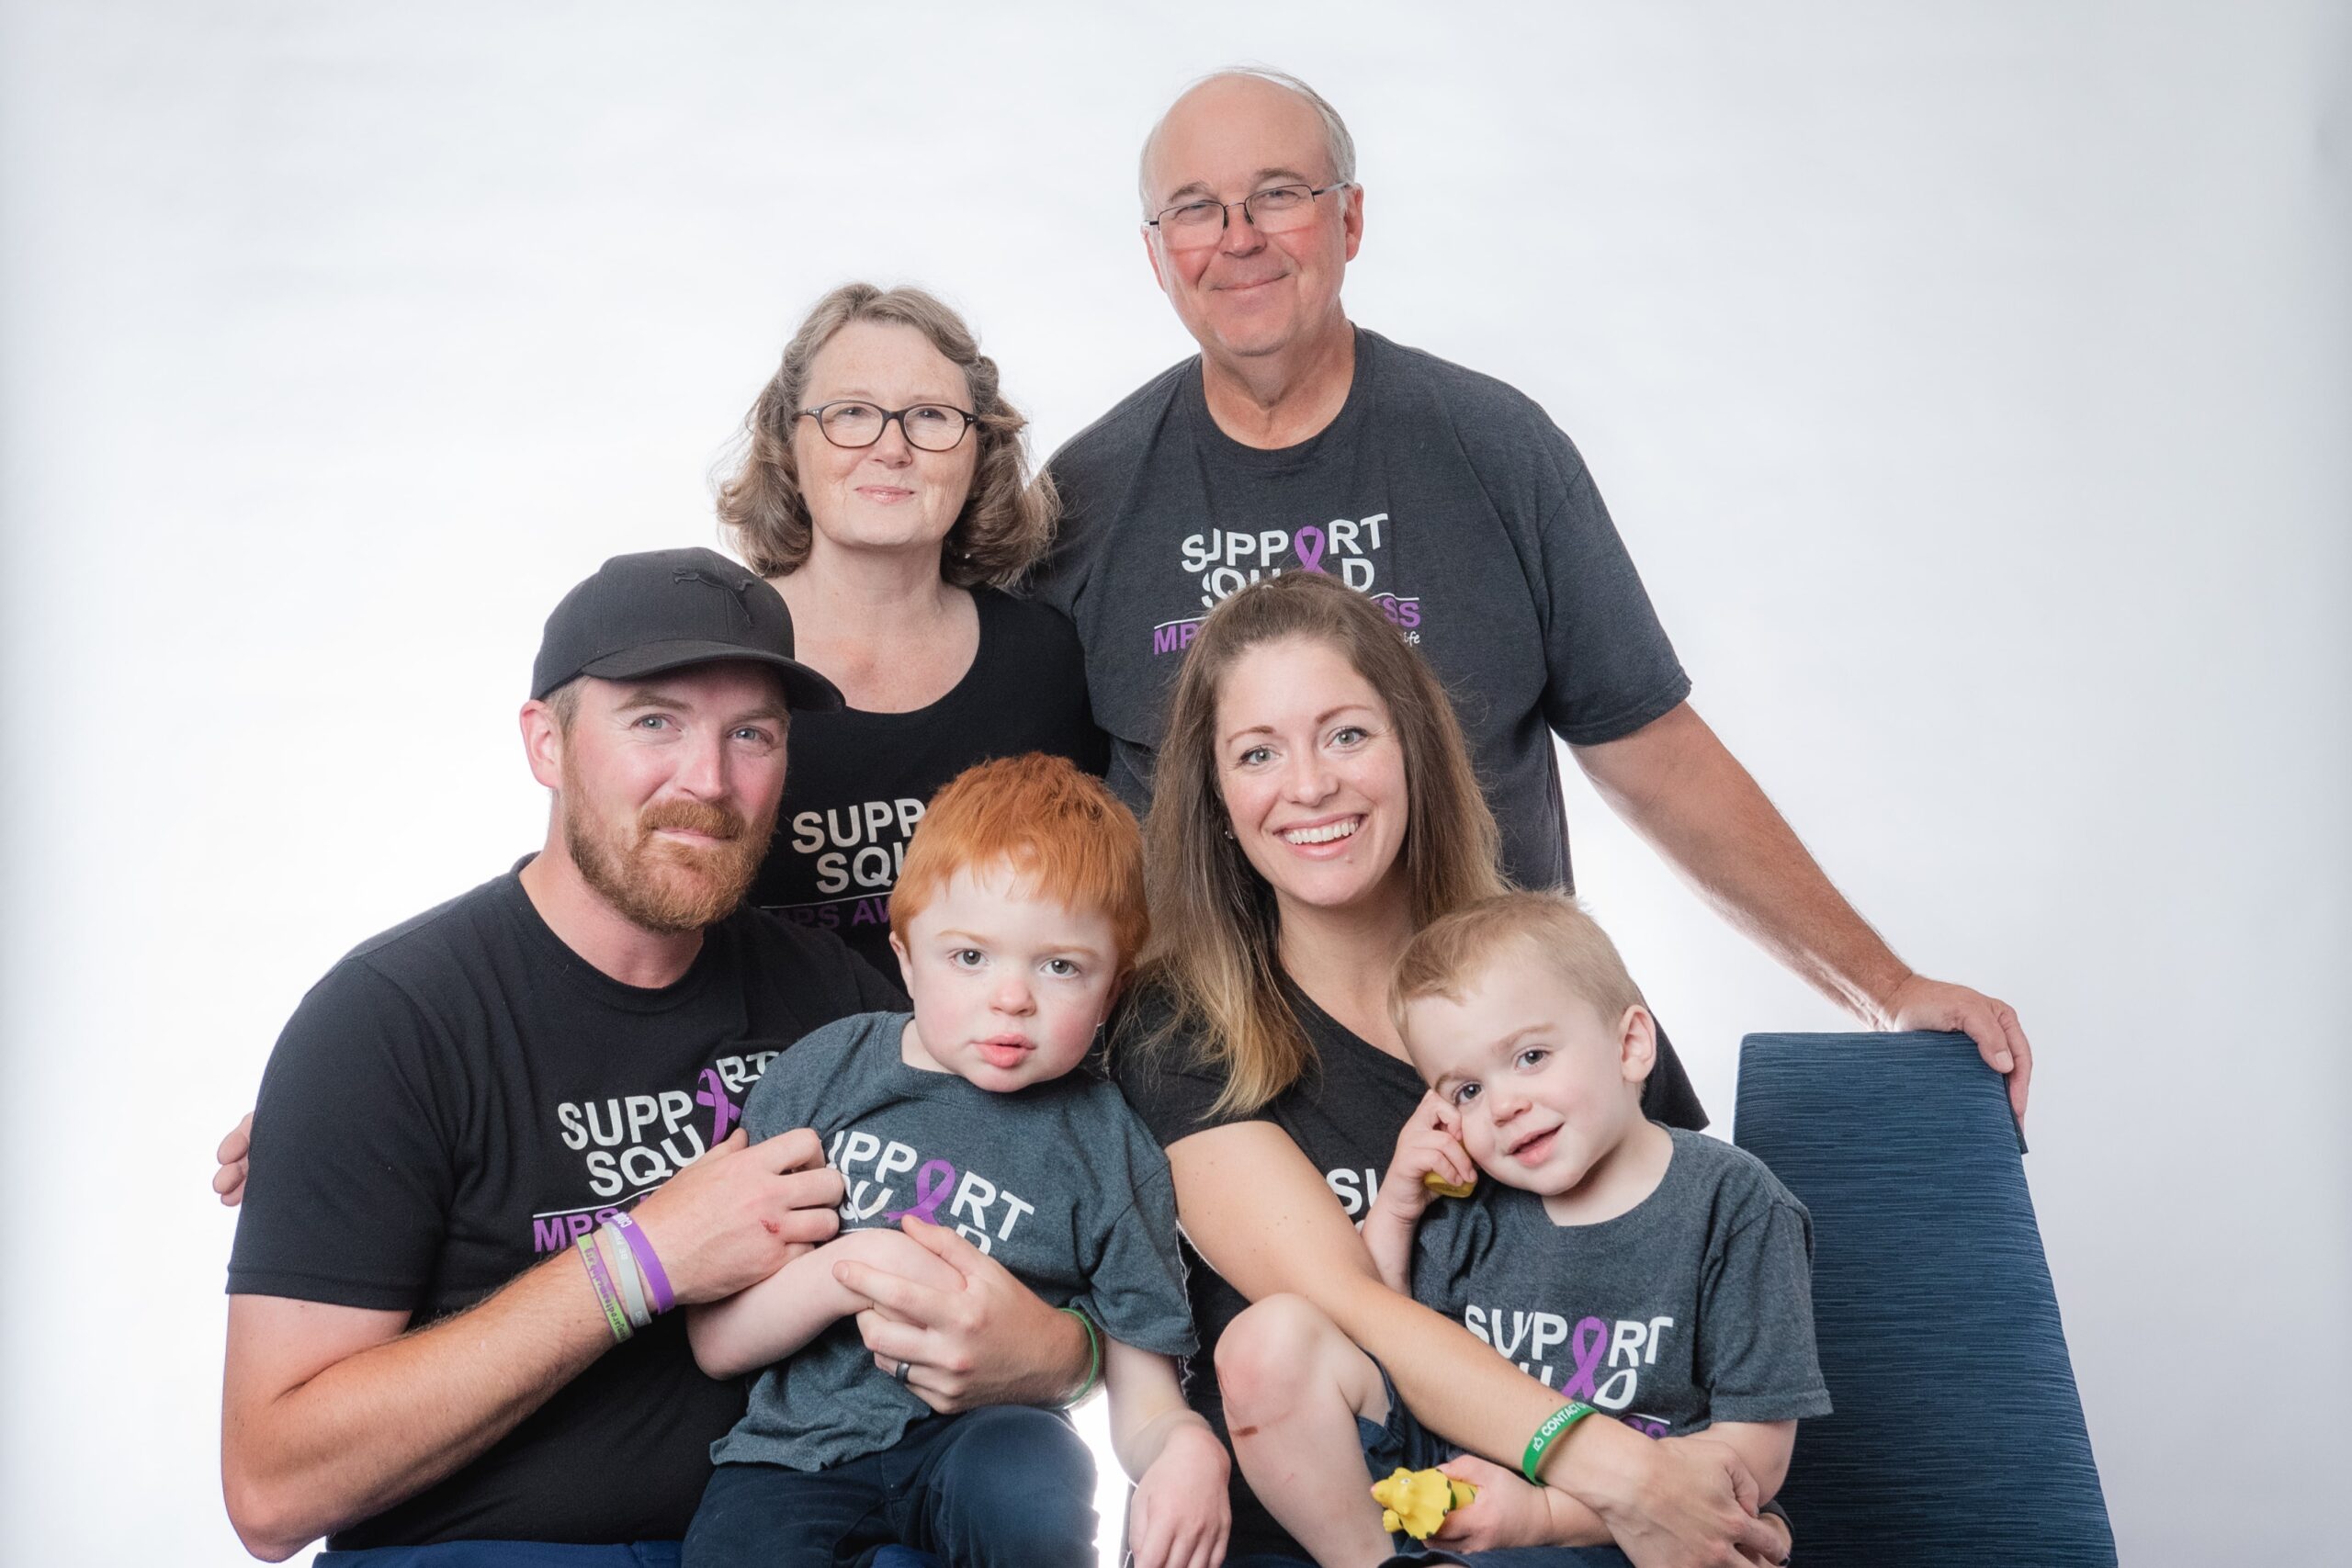 Family of 6 with matching MPS awareness tshirts